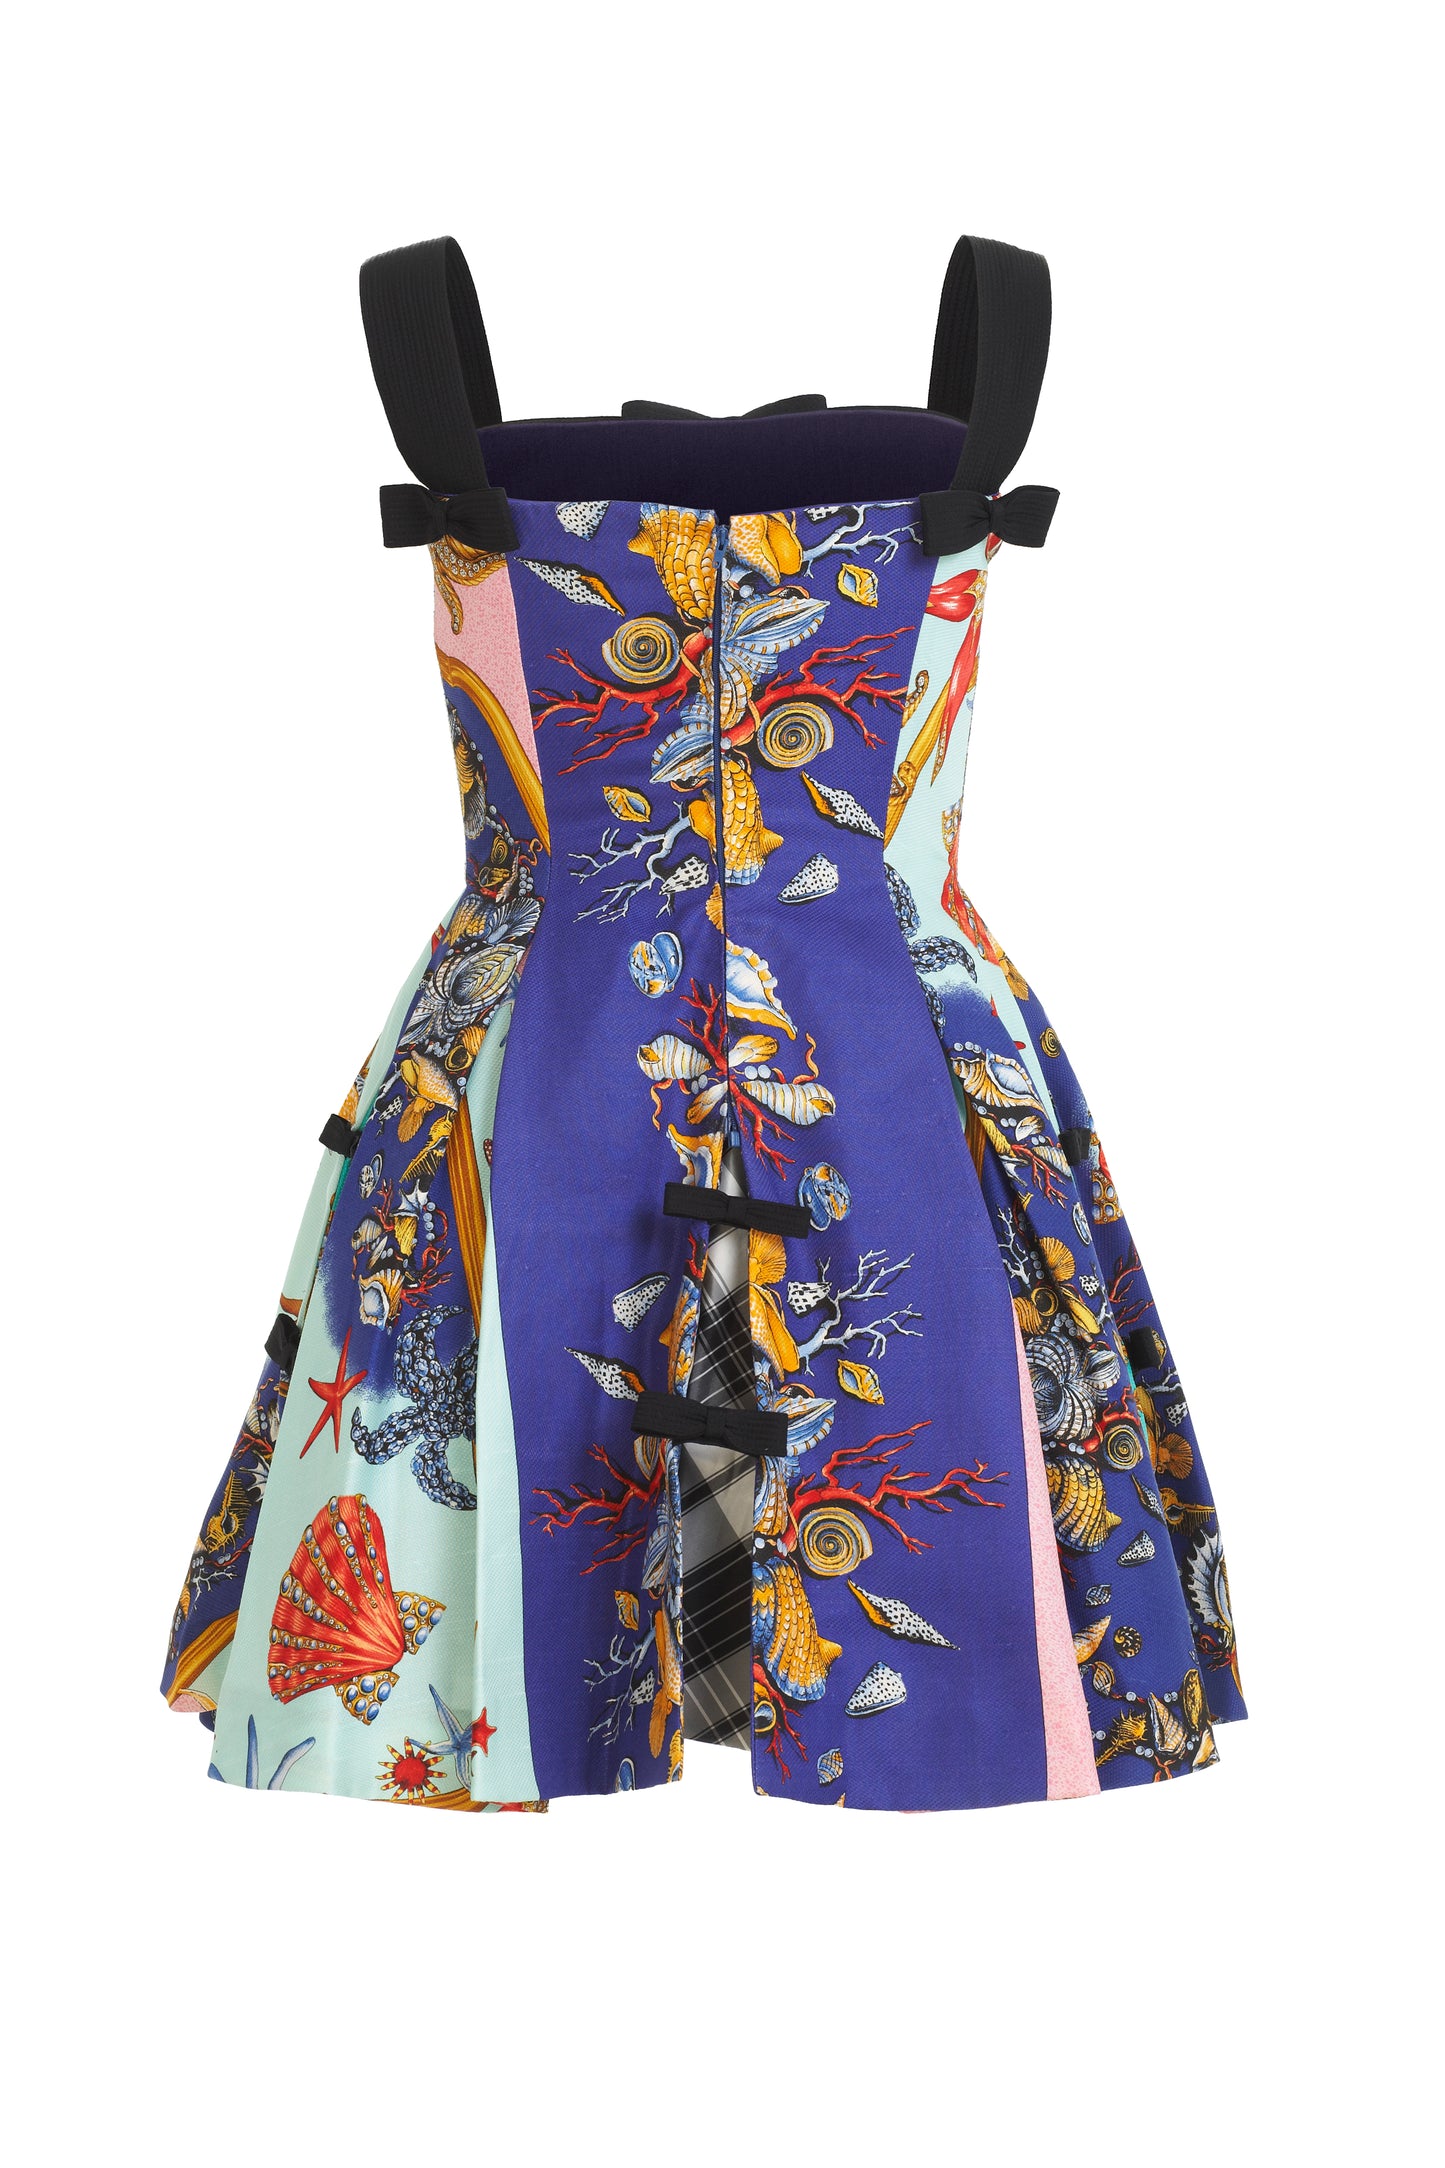 Gianni Versace Couture cocktail dress with multi sea scape print